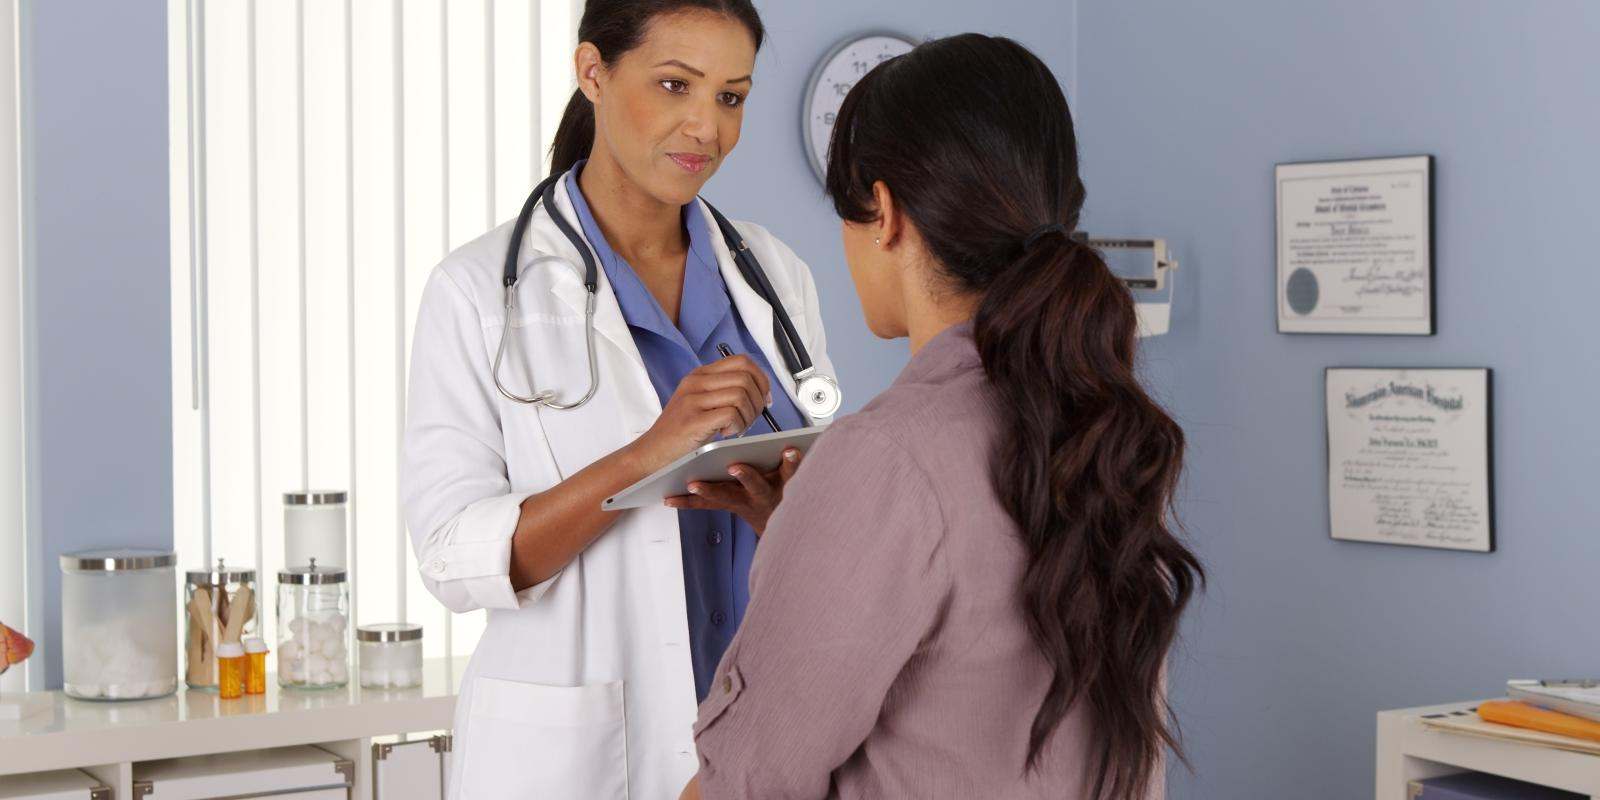 woman doctor explaining chart to patient